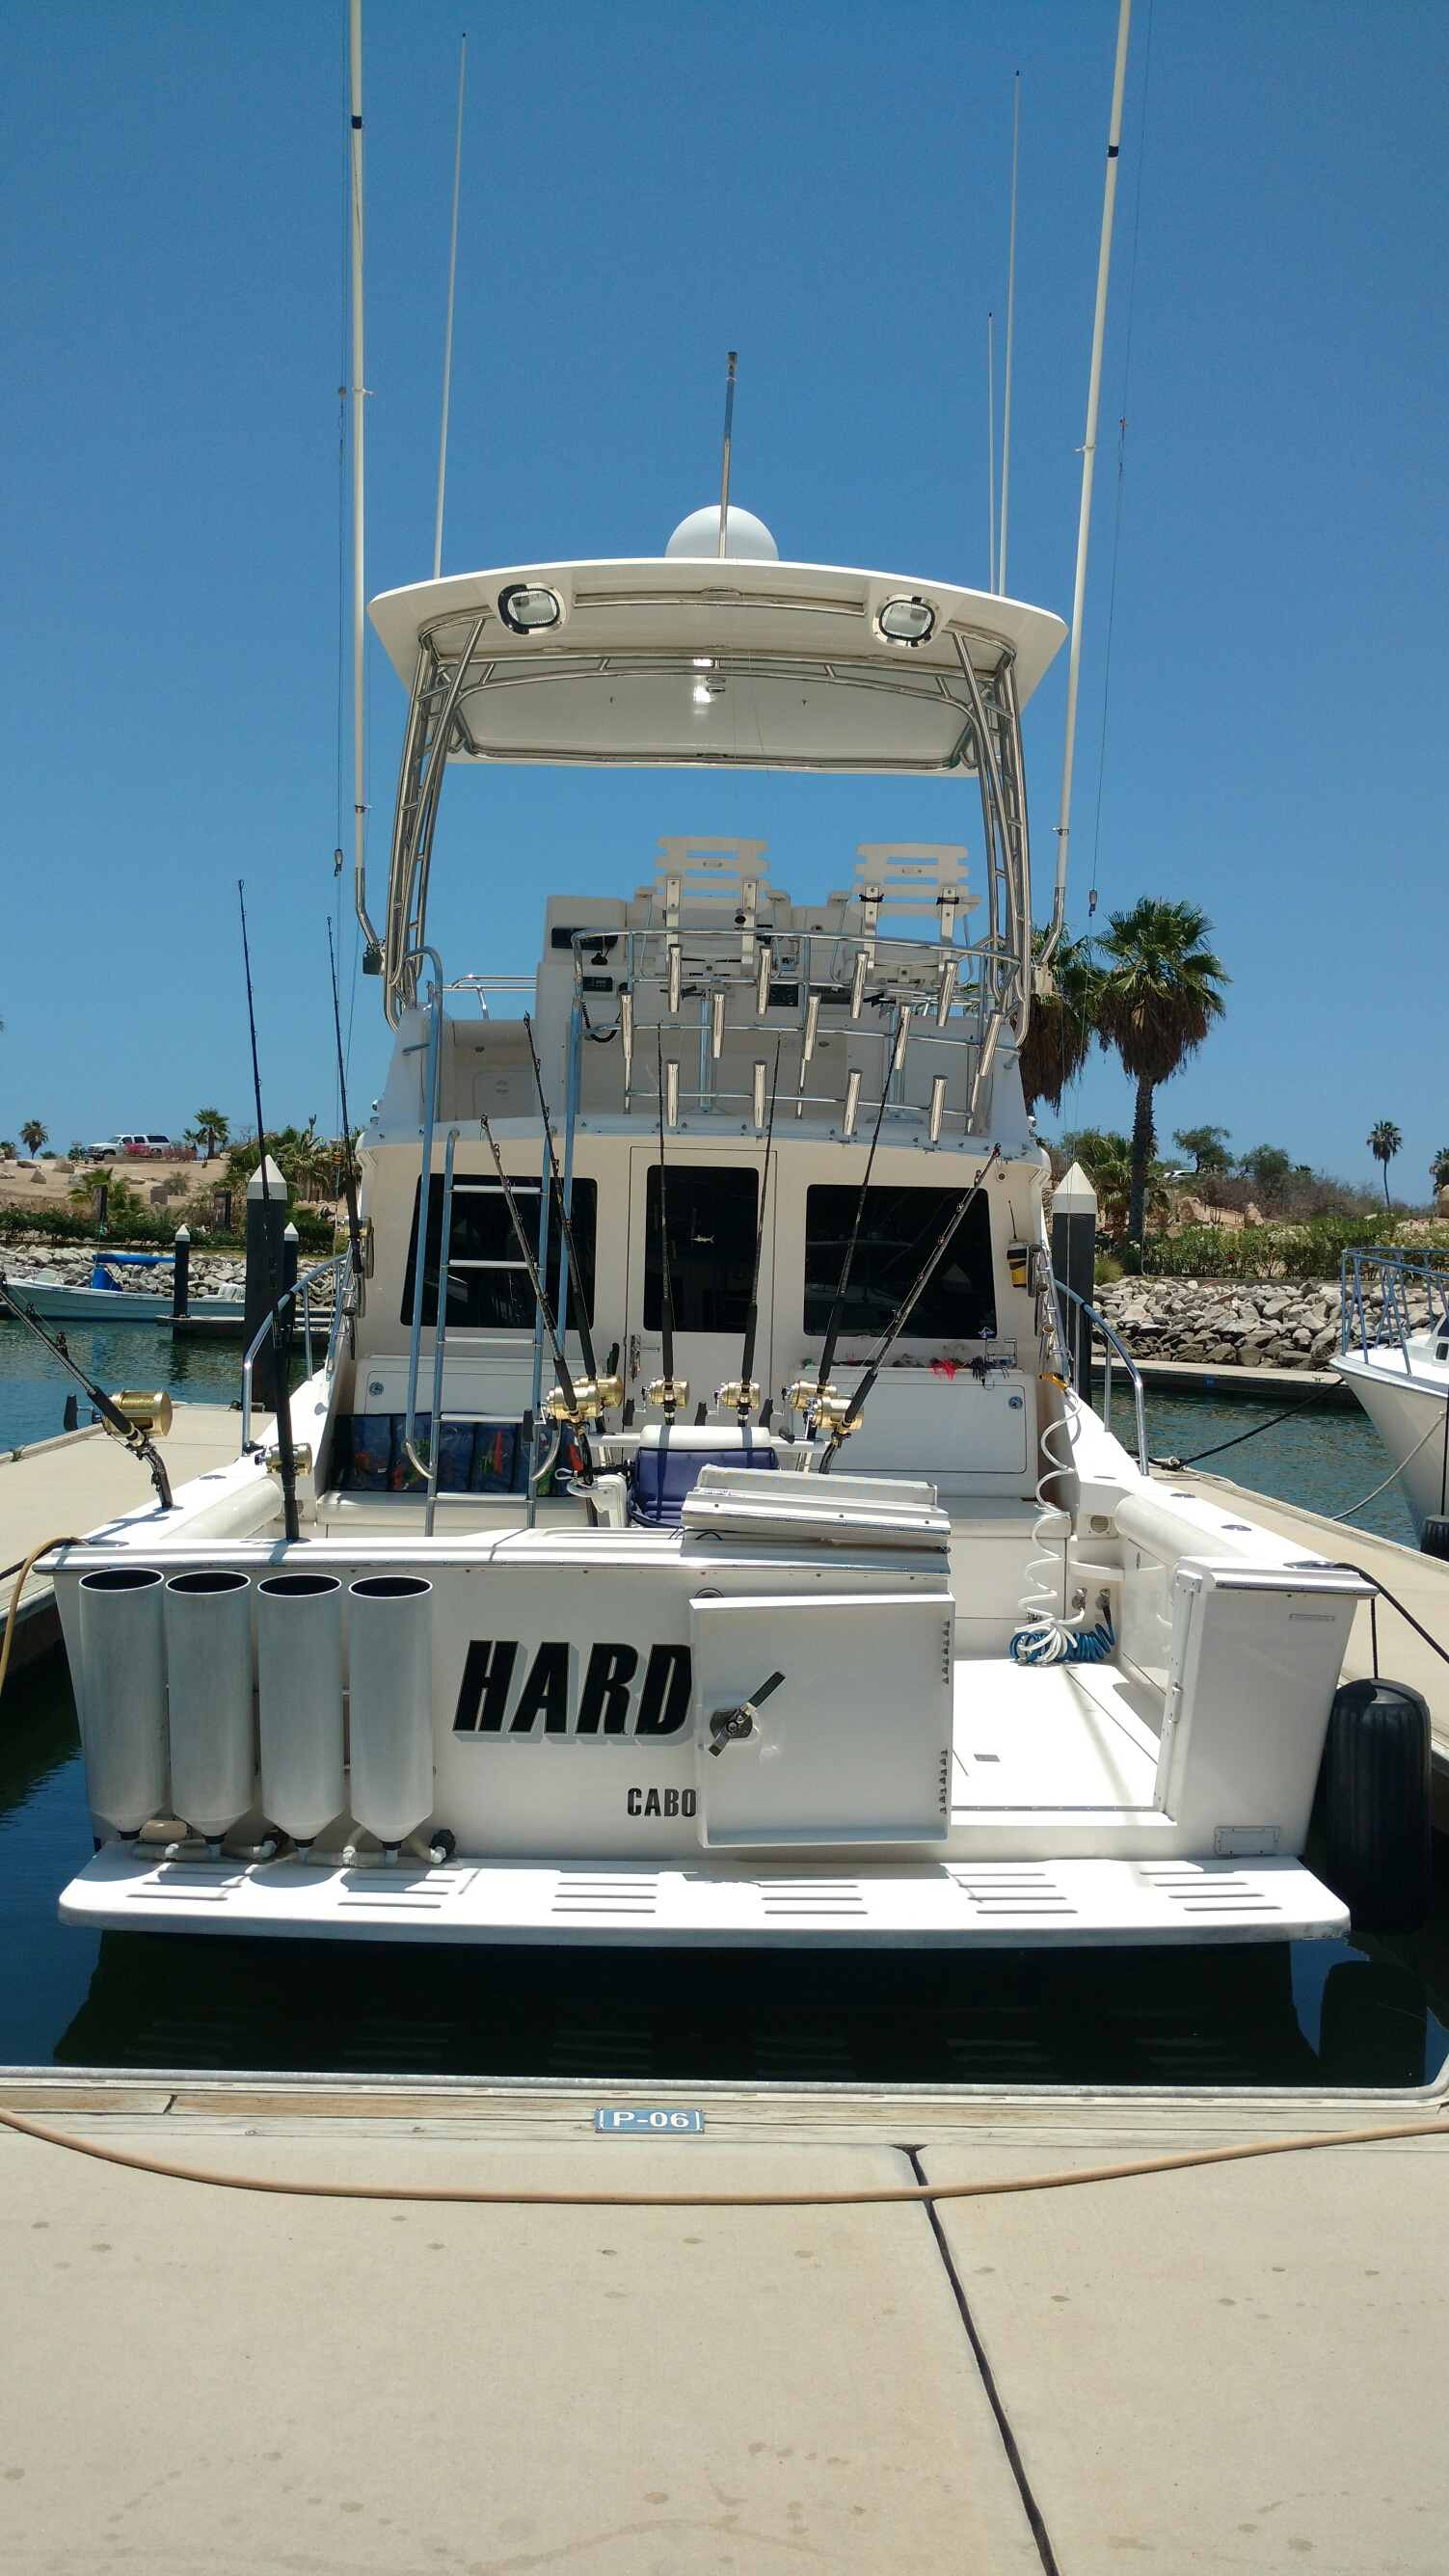 35' cabo with A/C up to 6 people